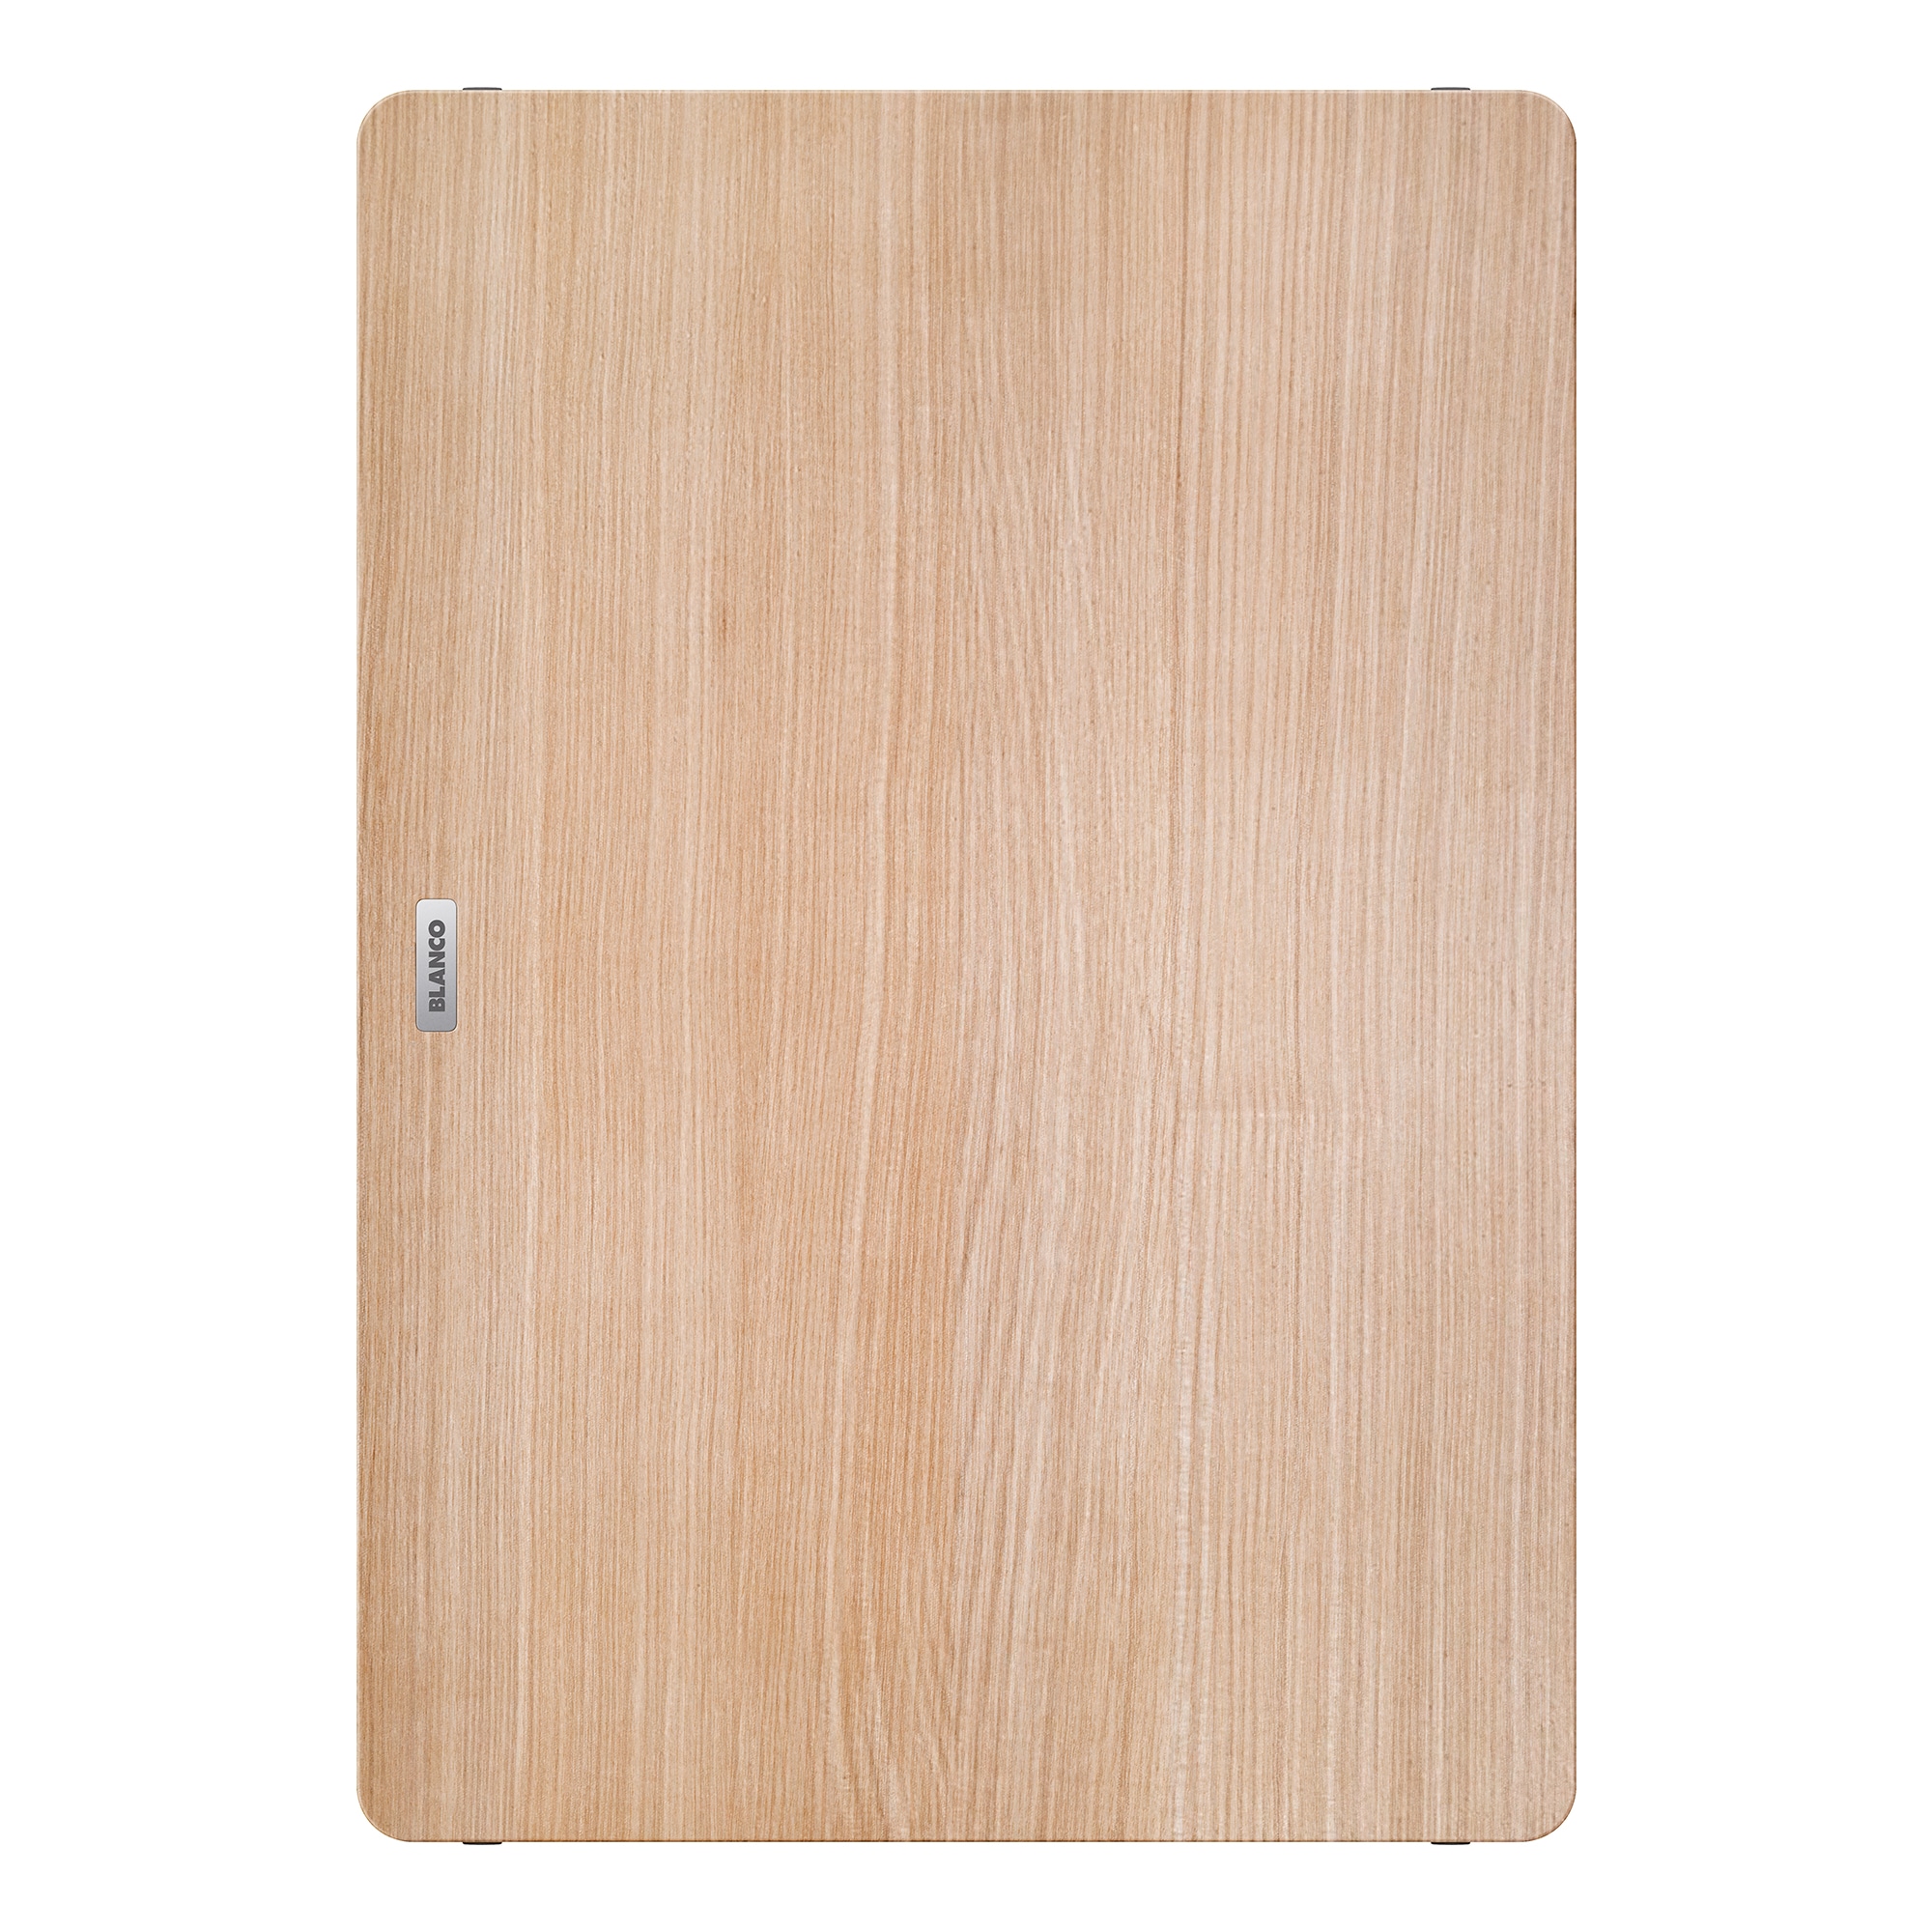 John Boos Medium Maple Wood Reversible Butcher Block Cutting Board, 18 x 12  x 1.25 Inches Thick, Edge Grain, and Integrated Hand Grip, Brown